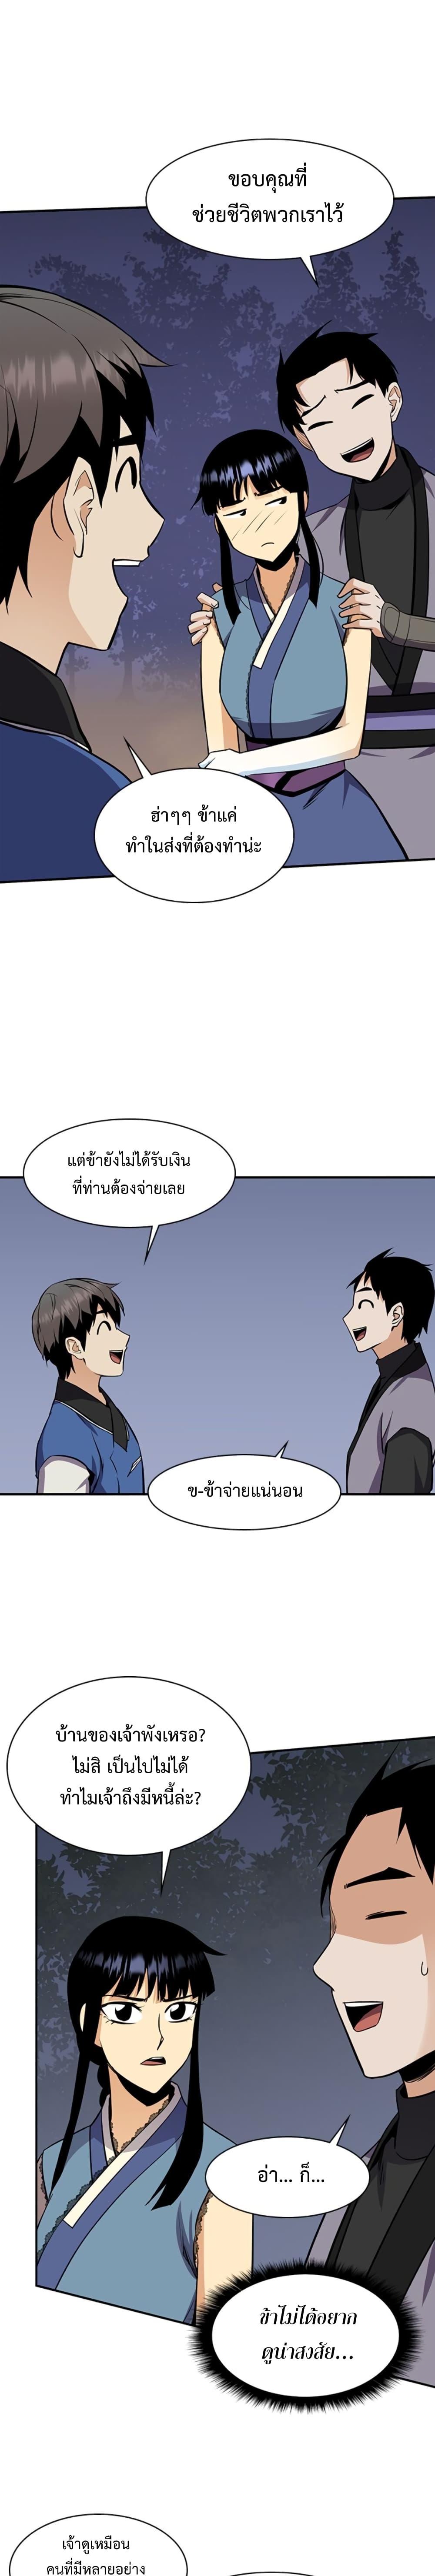 The Strongest Ever à¸à¸­à¸à¸à¸µà¹ 31 (25)